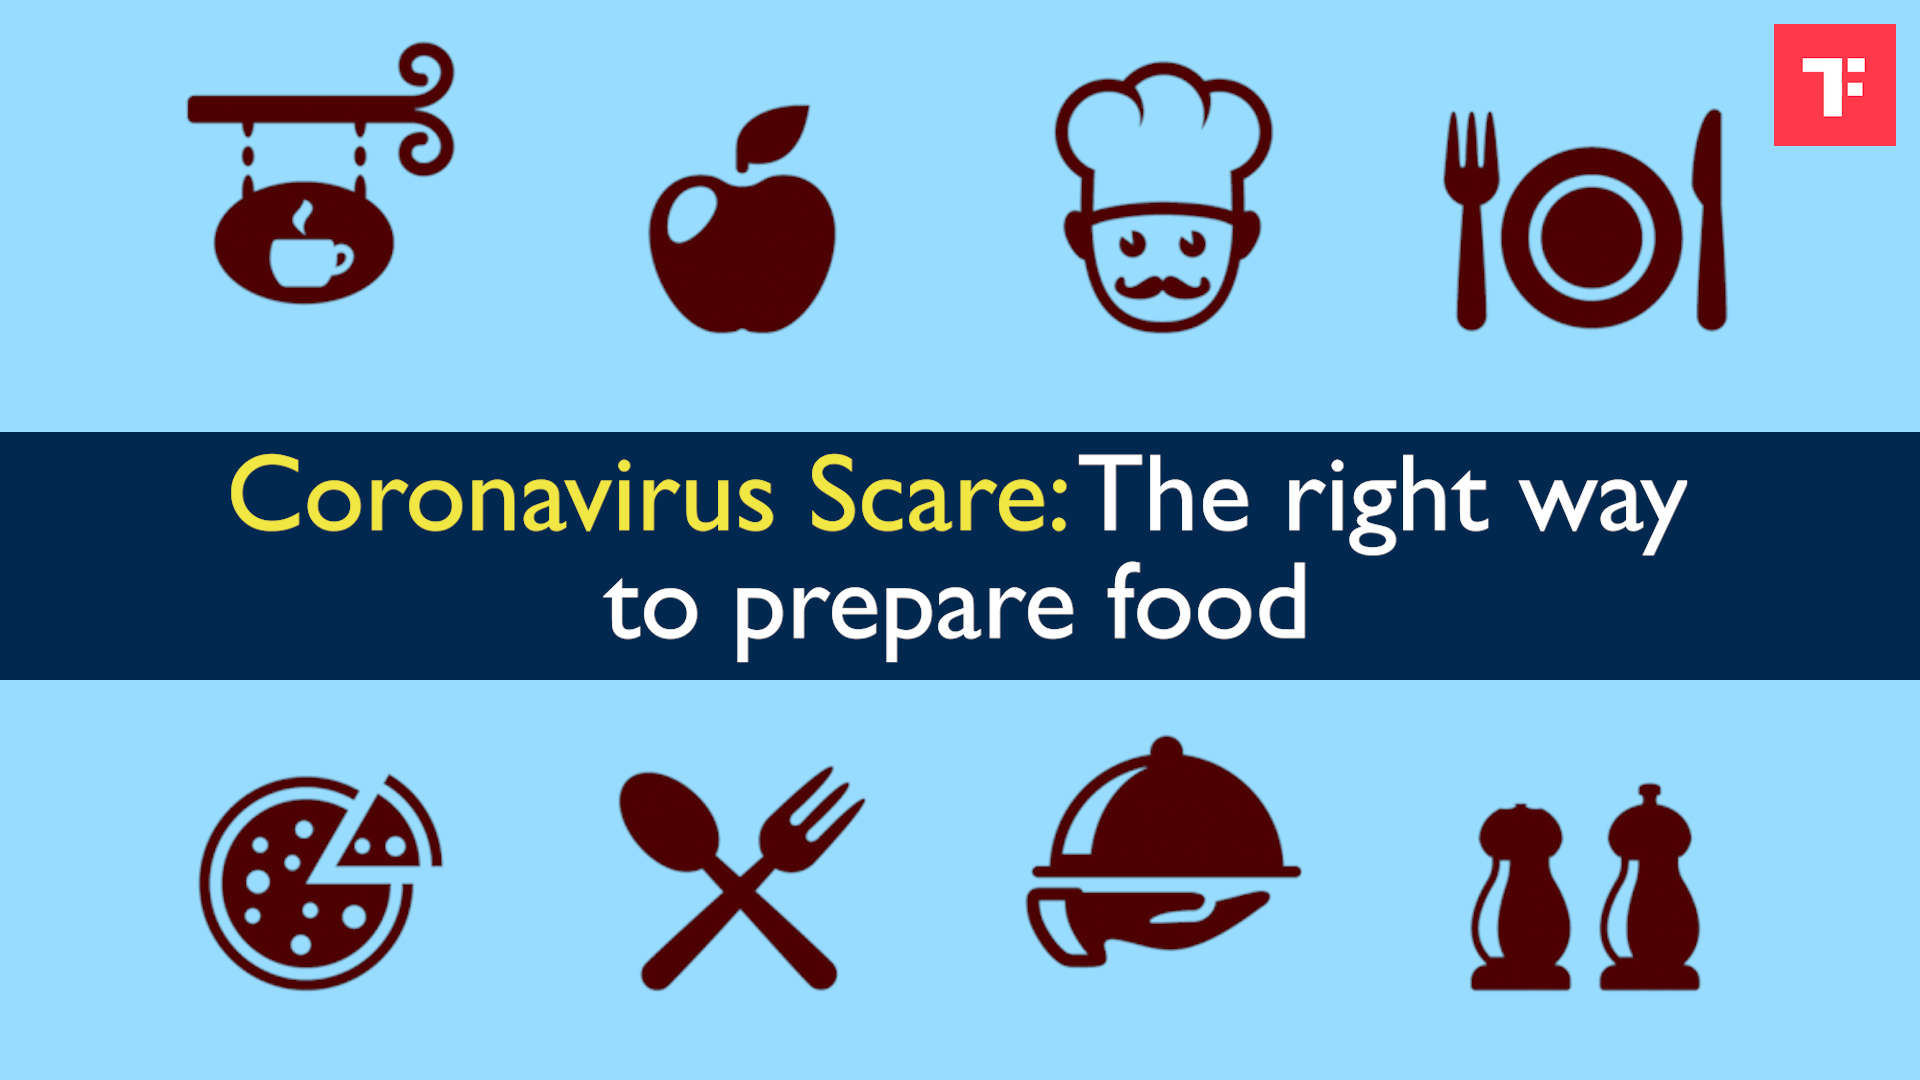 Coronavirus Food Tips: The right way to prepare food to stay safe from